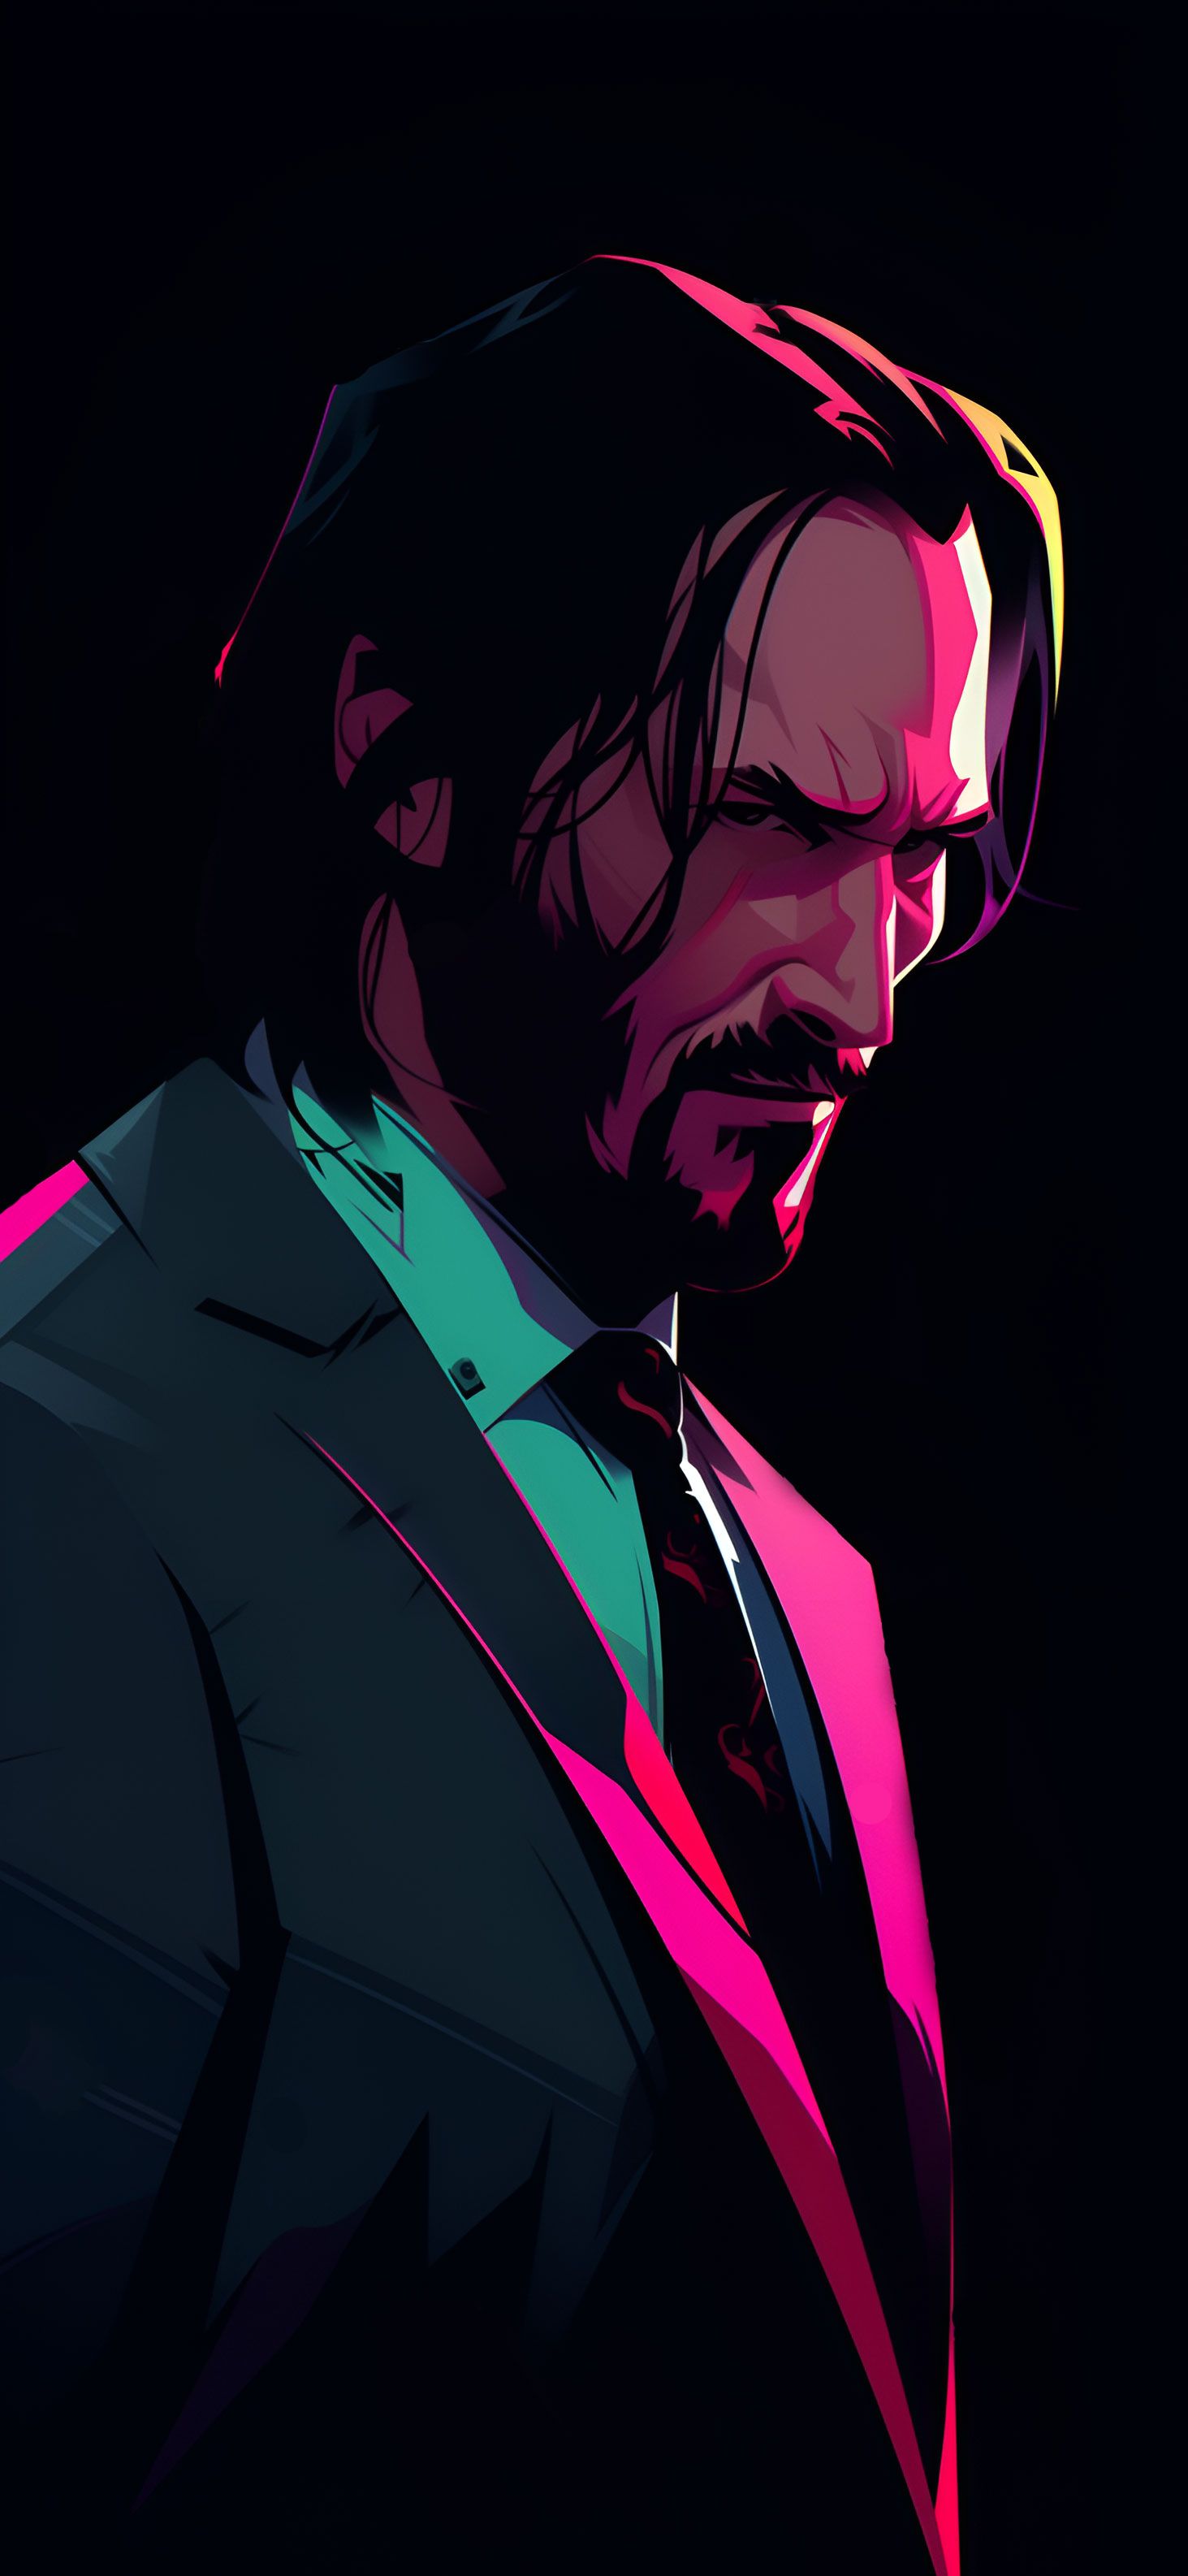 John Wick iPhone Wallpaper with high-resolution 1080x1920 pixel. You can use this wallpaper for your iPhone 5, 6, 7, 8, X, XS, XR backgrounds, Mobile Screensaver, or iPad Lock Screen - John Wick